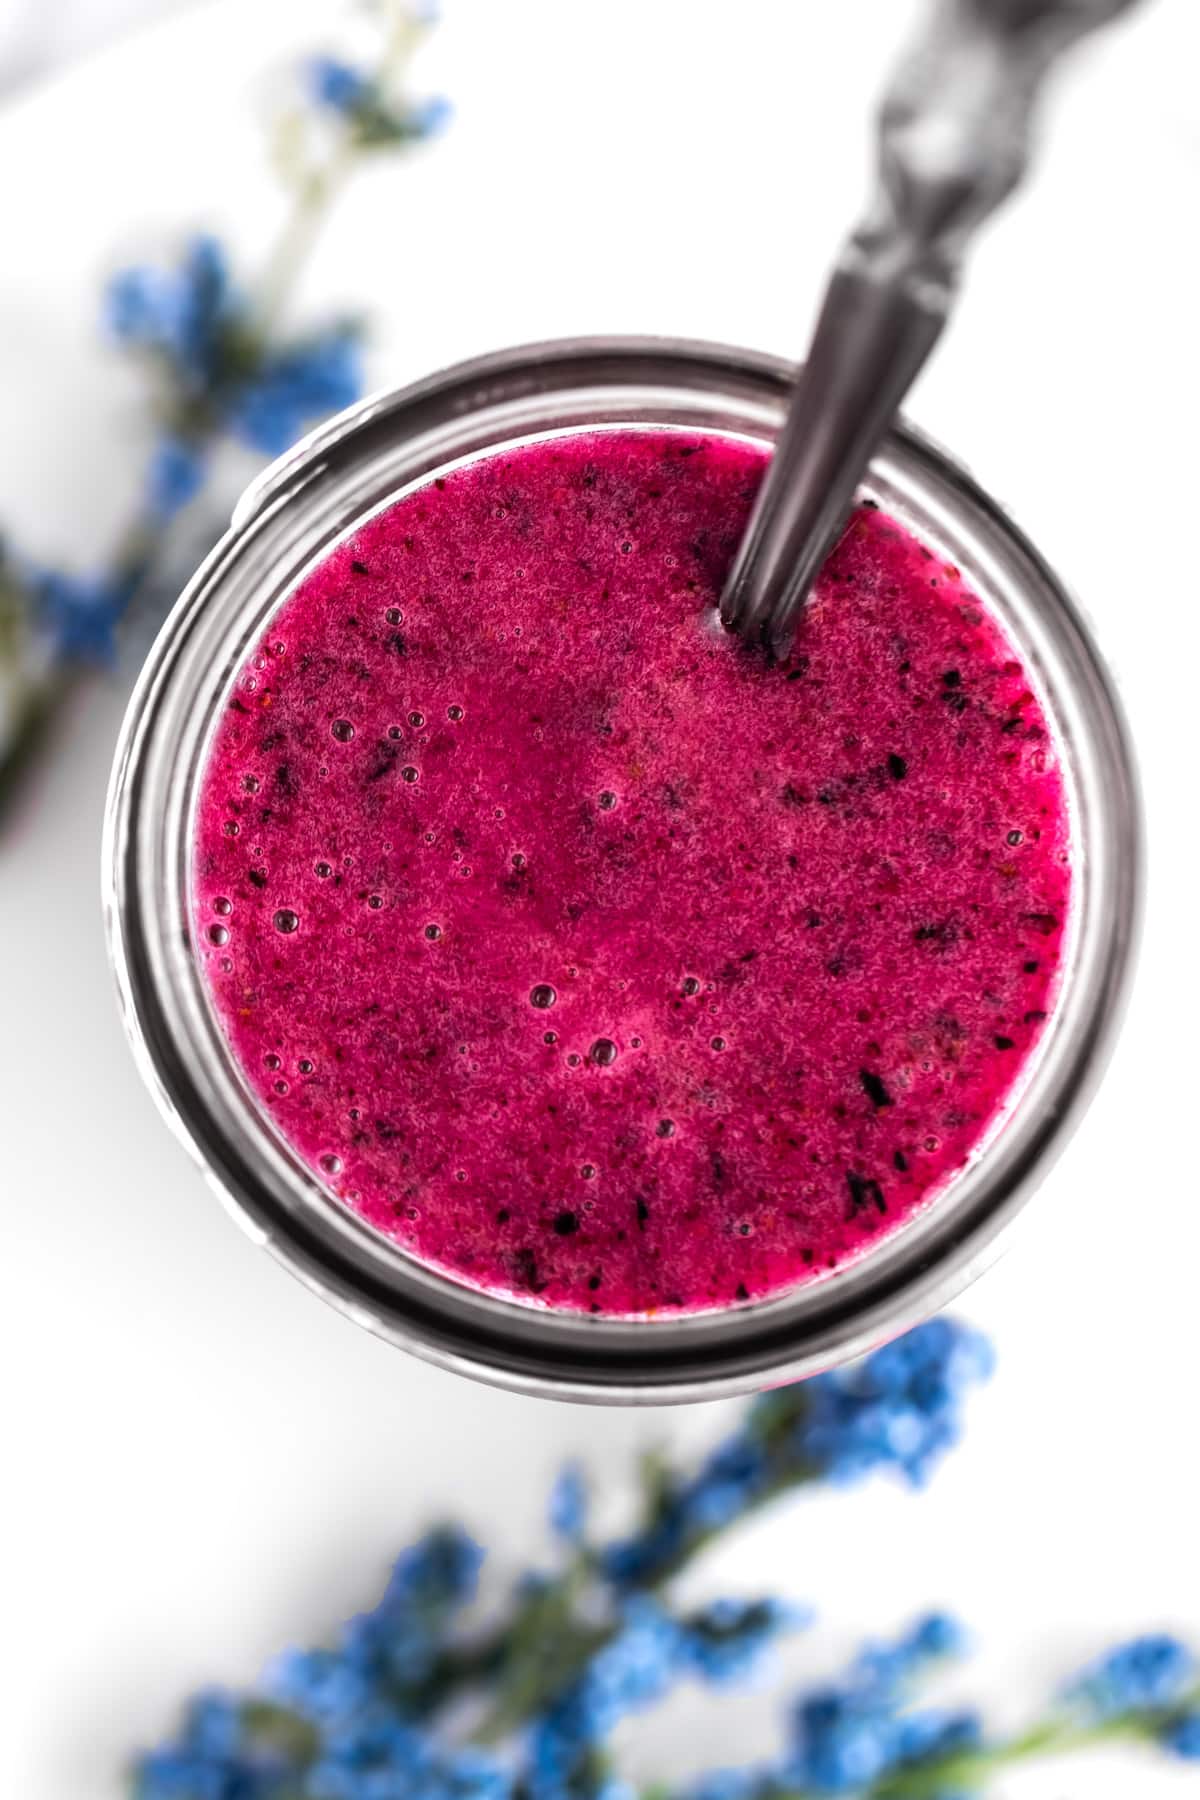 Overhead view of a mason jar of pinkish-purple blueberry glaze on a white table.